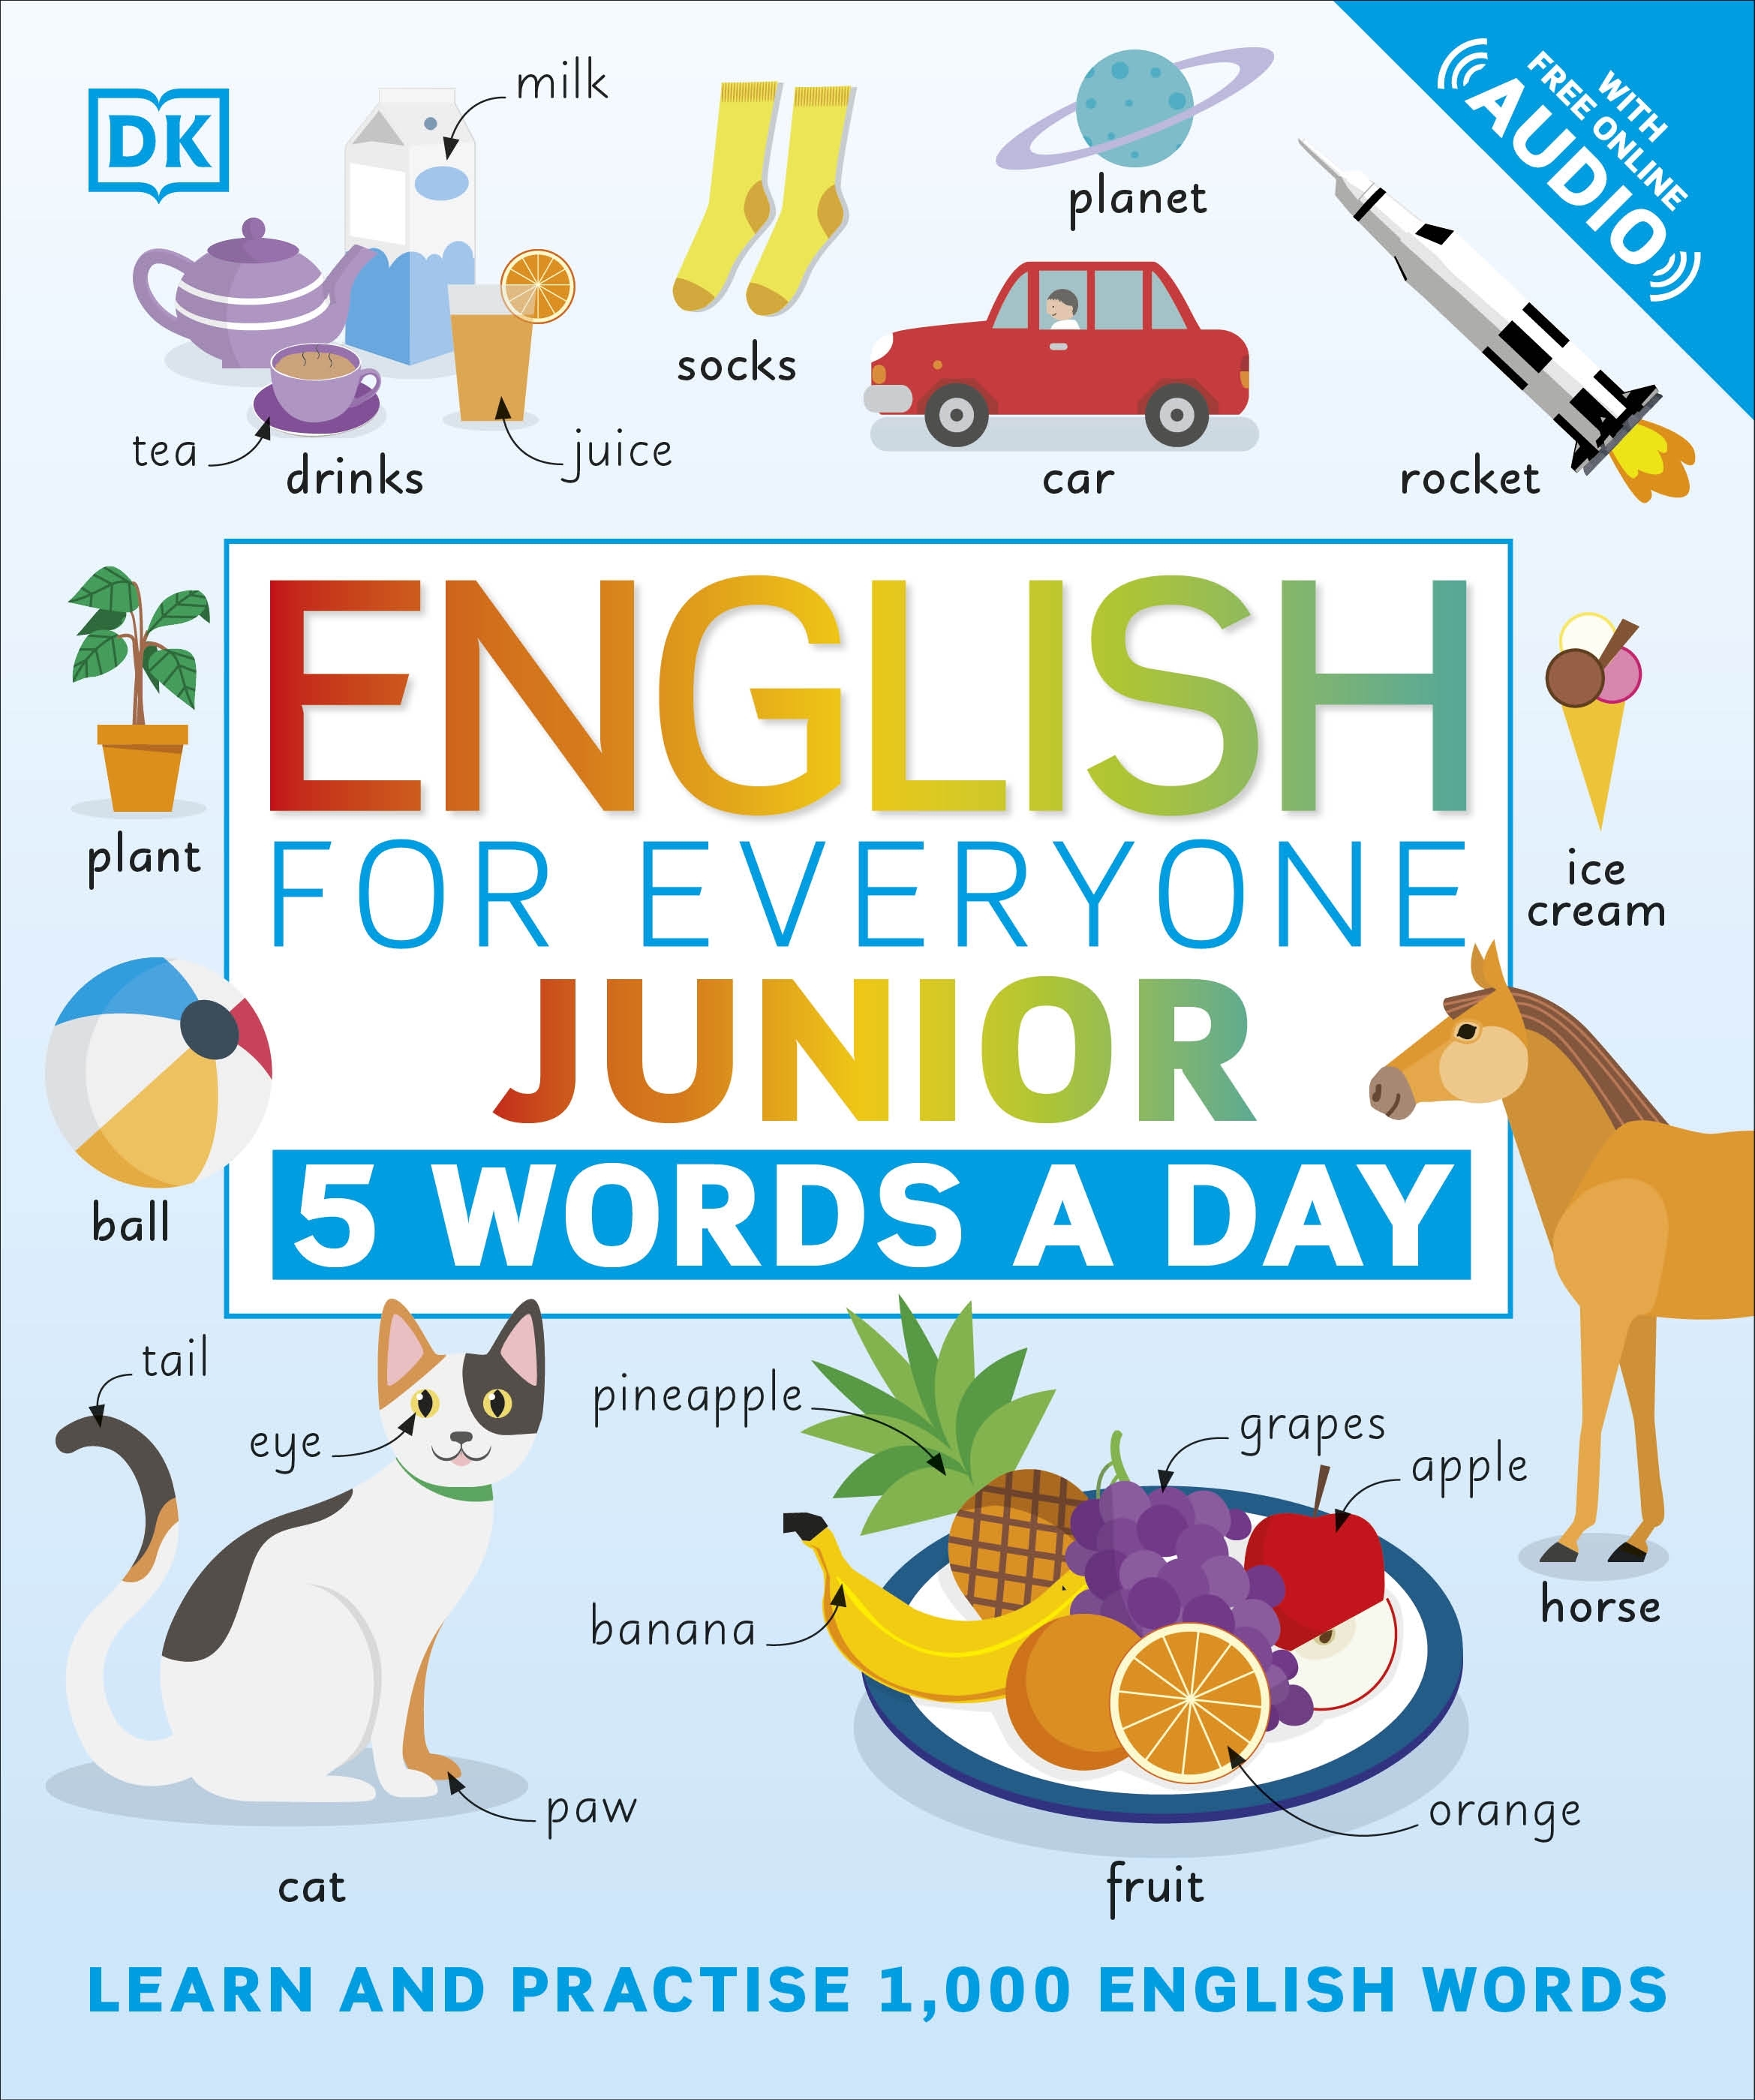 english-for-everyone-junior-5-words-a-day-by-dk-penguin-books-australia